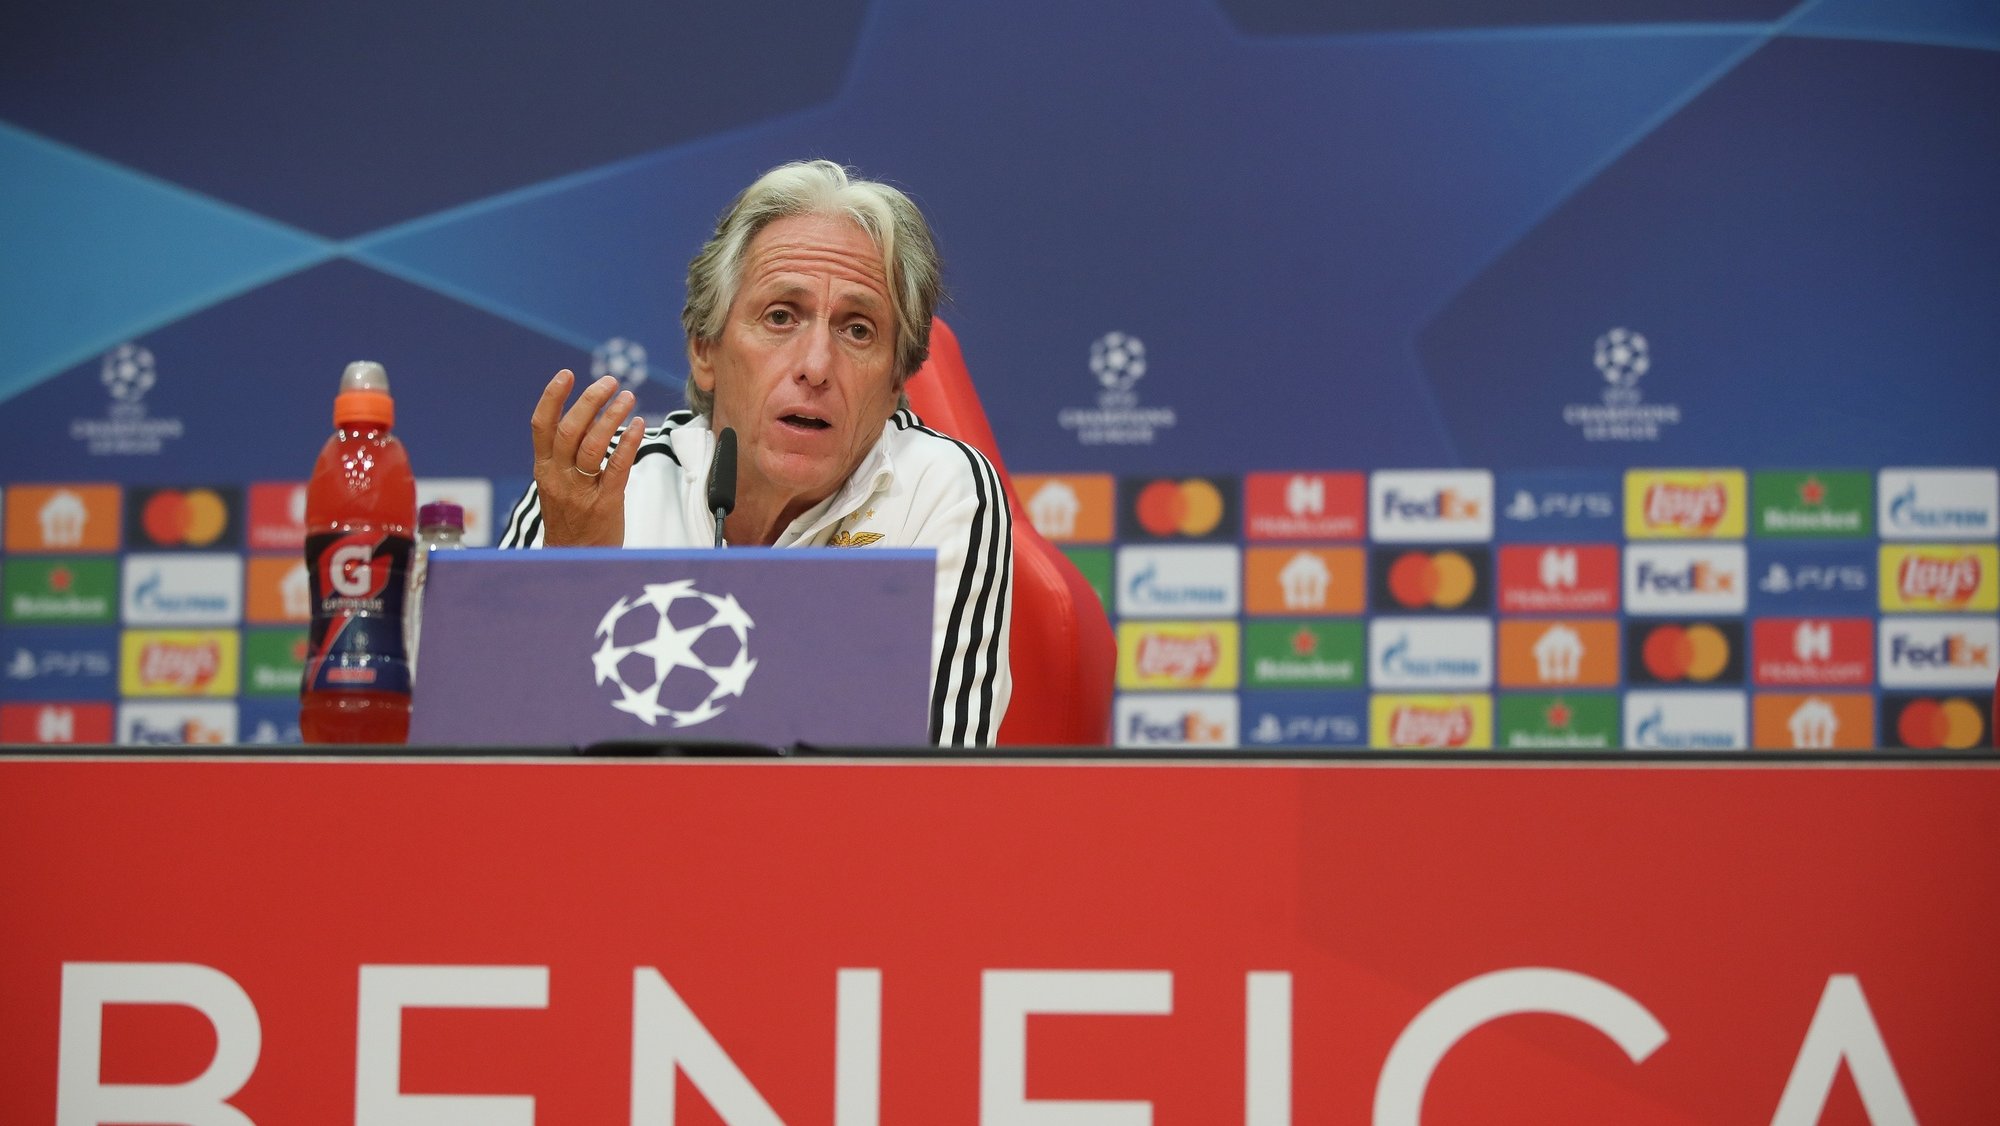 Benfica&#039;s head coach Jorge Jesus attends a press conference at Benfica&#039;s training camp in Seixal, Portugal, 1 November 2021. Benfica will face Bayern Munich in their UEFA Champion League group E soccer match on 2 November. MÁRIO CRUZ/LUSA